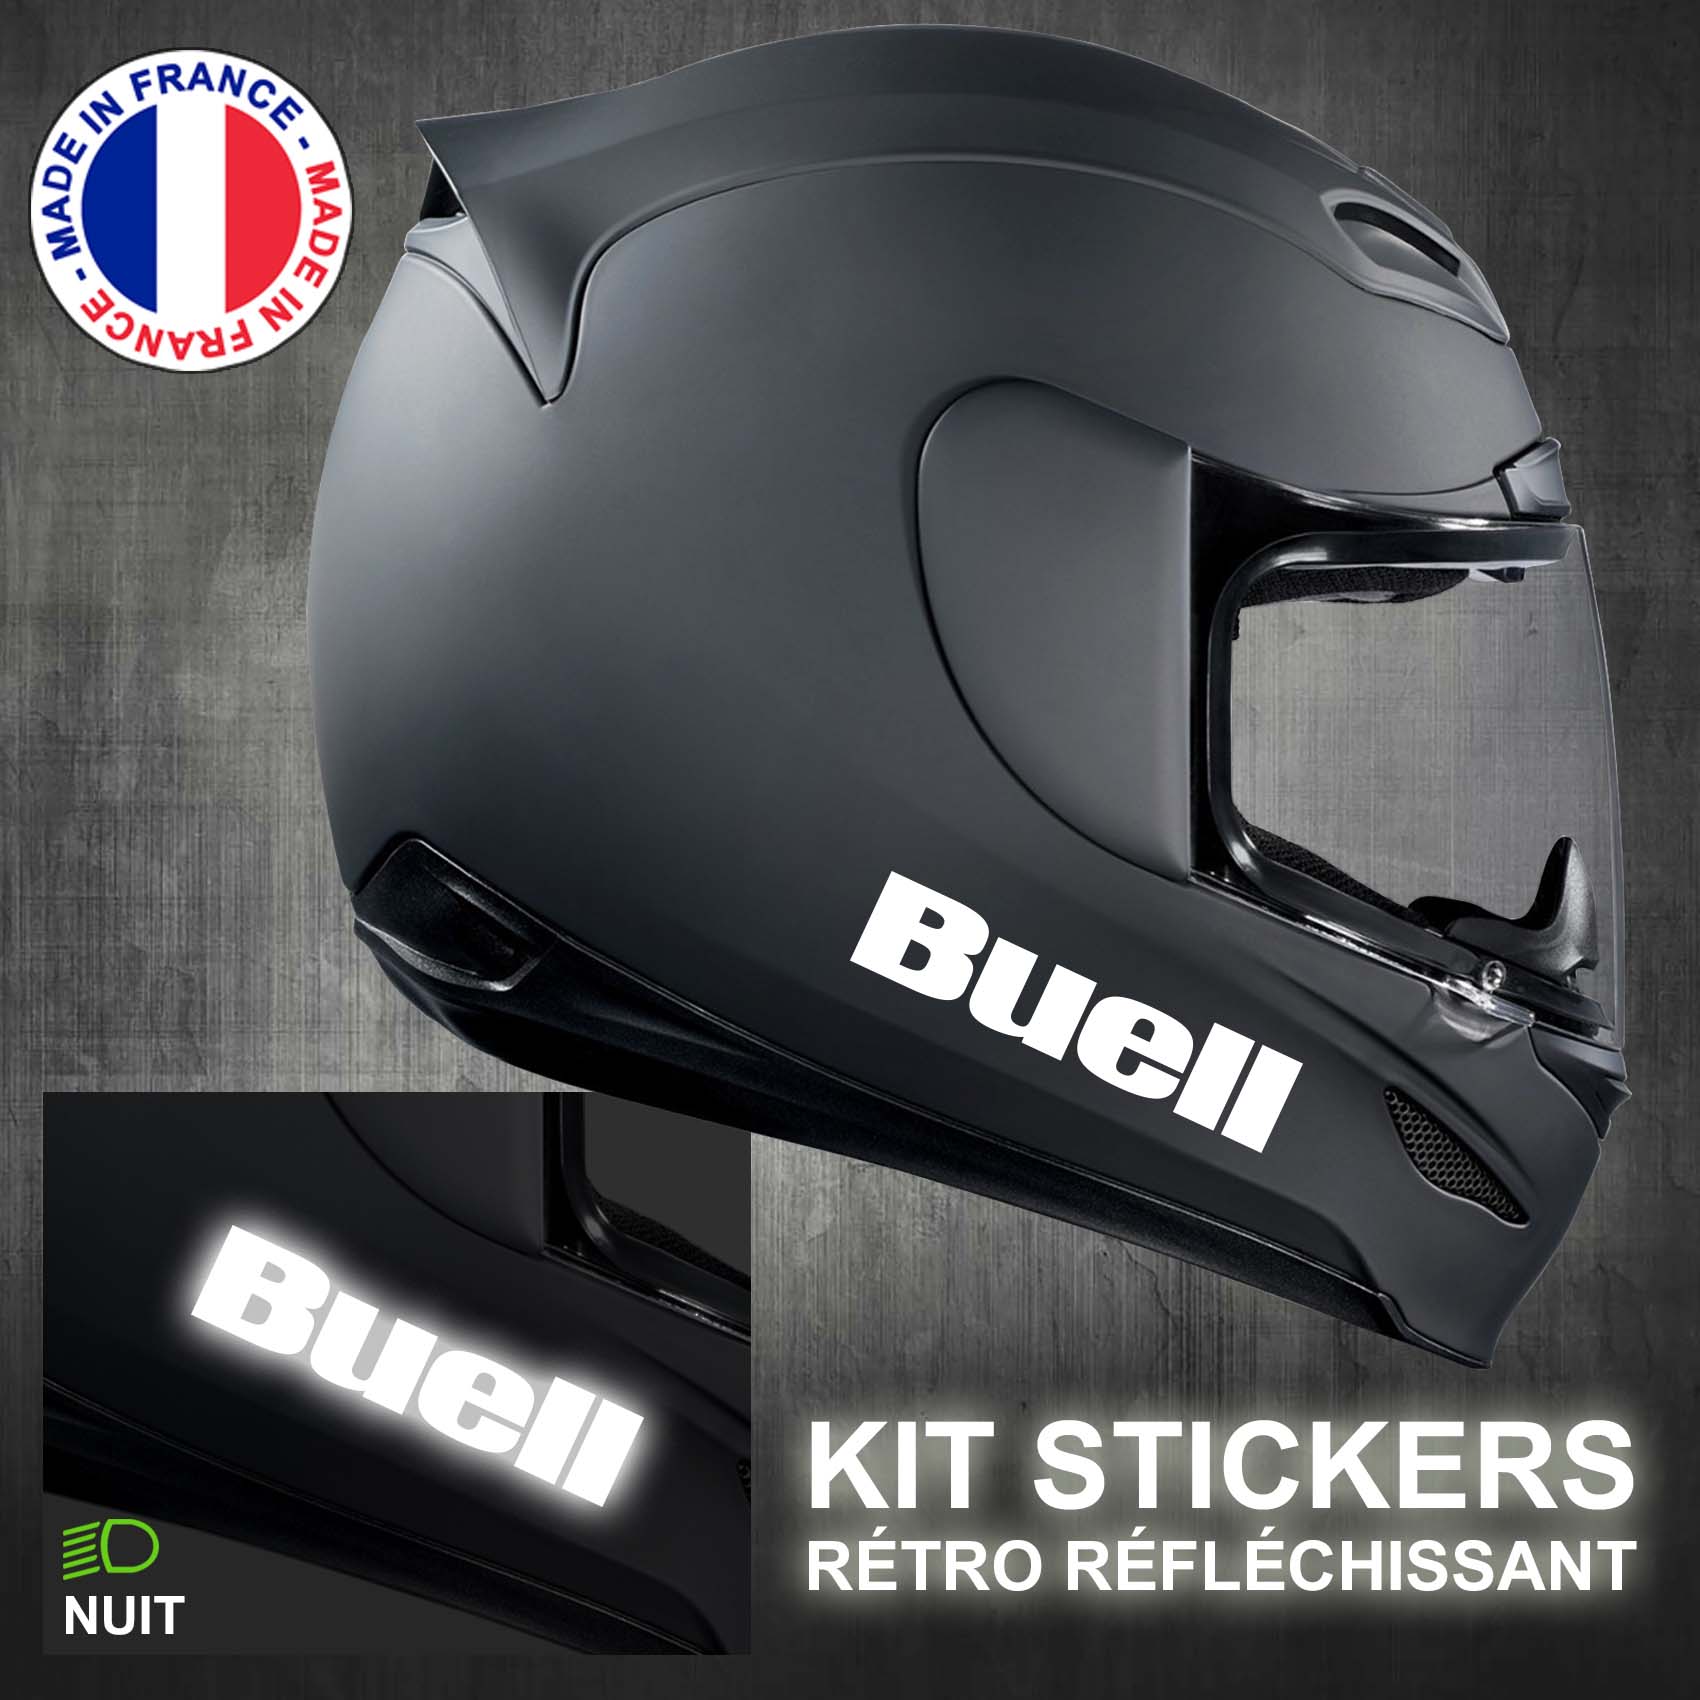 stickers-casque-moto-buell-ref2-retro-reflechissant-autocollant-noir-moto-velo-tuning-racing-route-sticker-casques-adhesif-scooter-nuit-securite-decals-personnalise-personnalisable-min